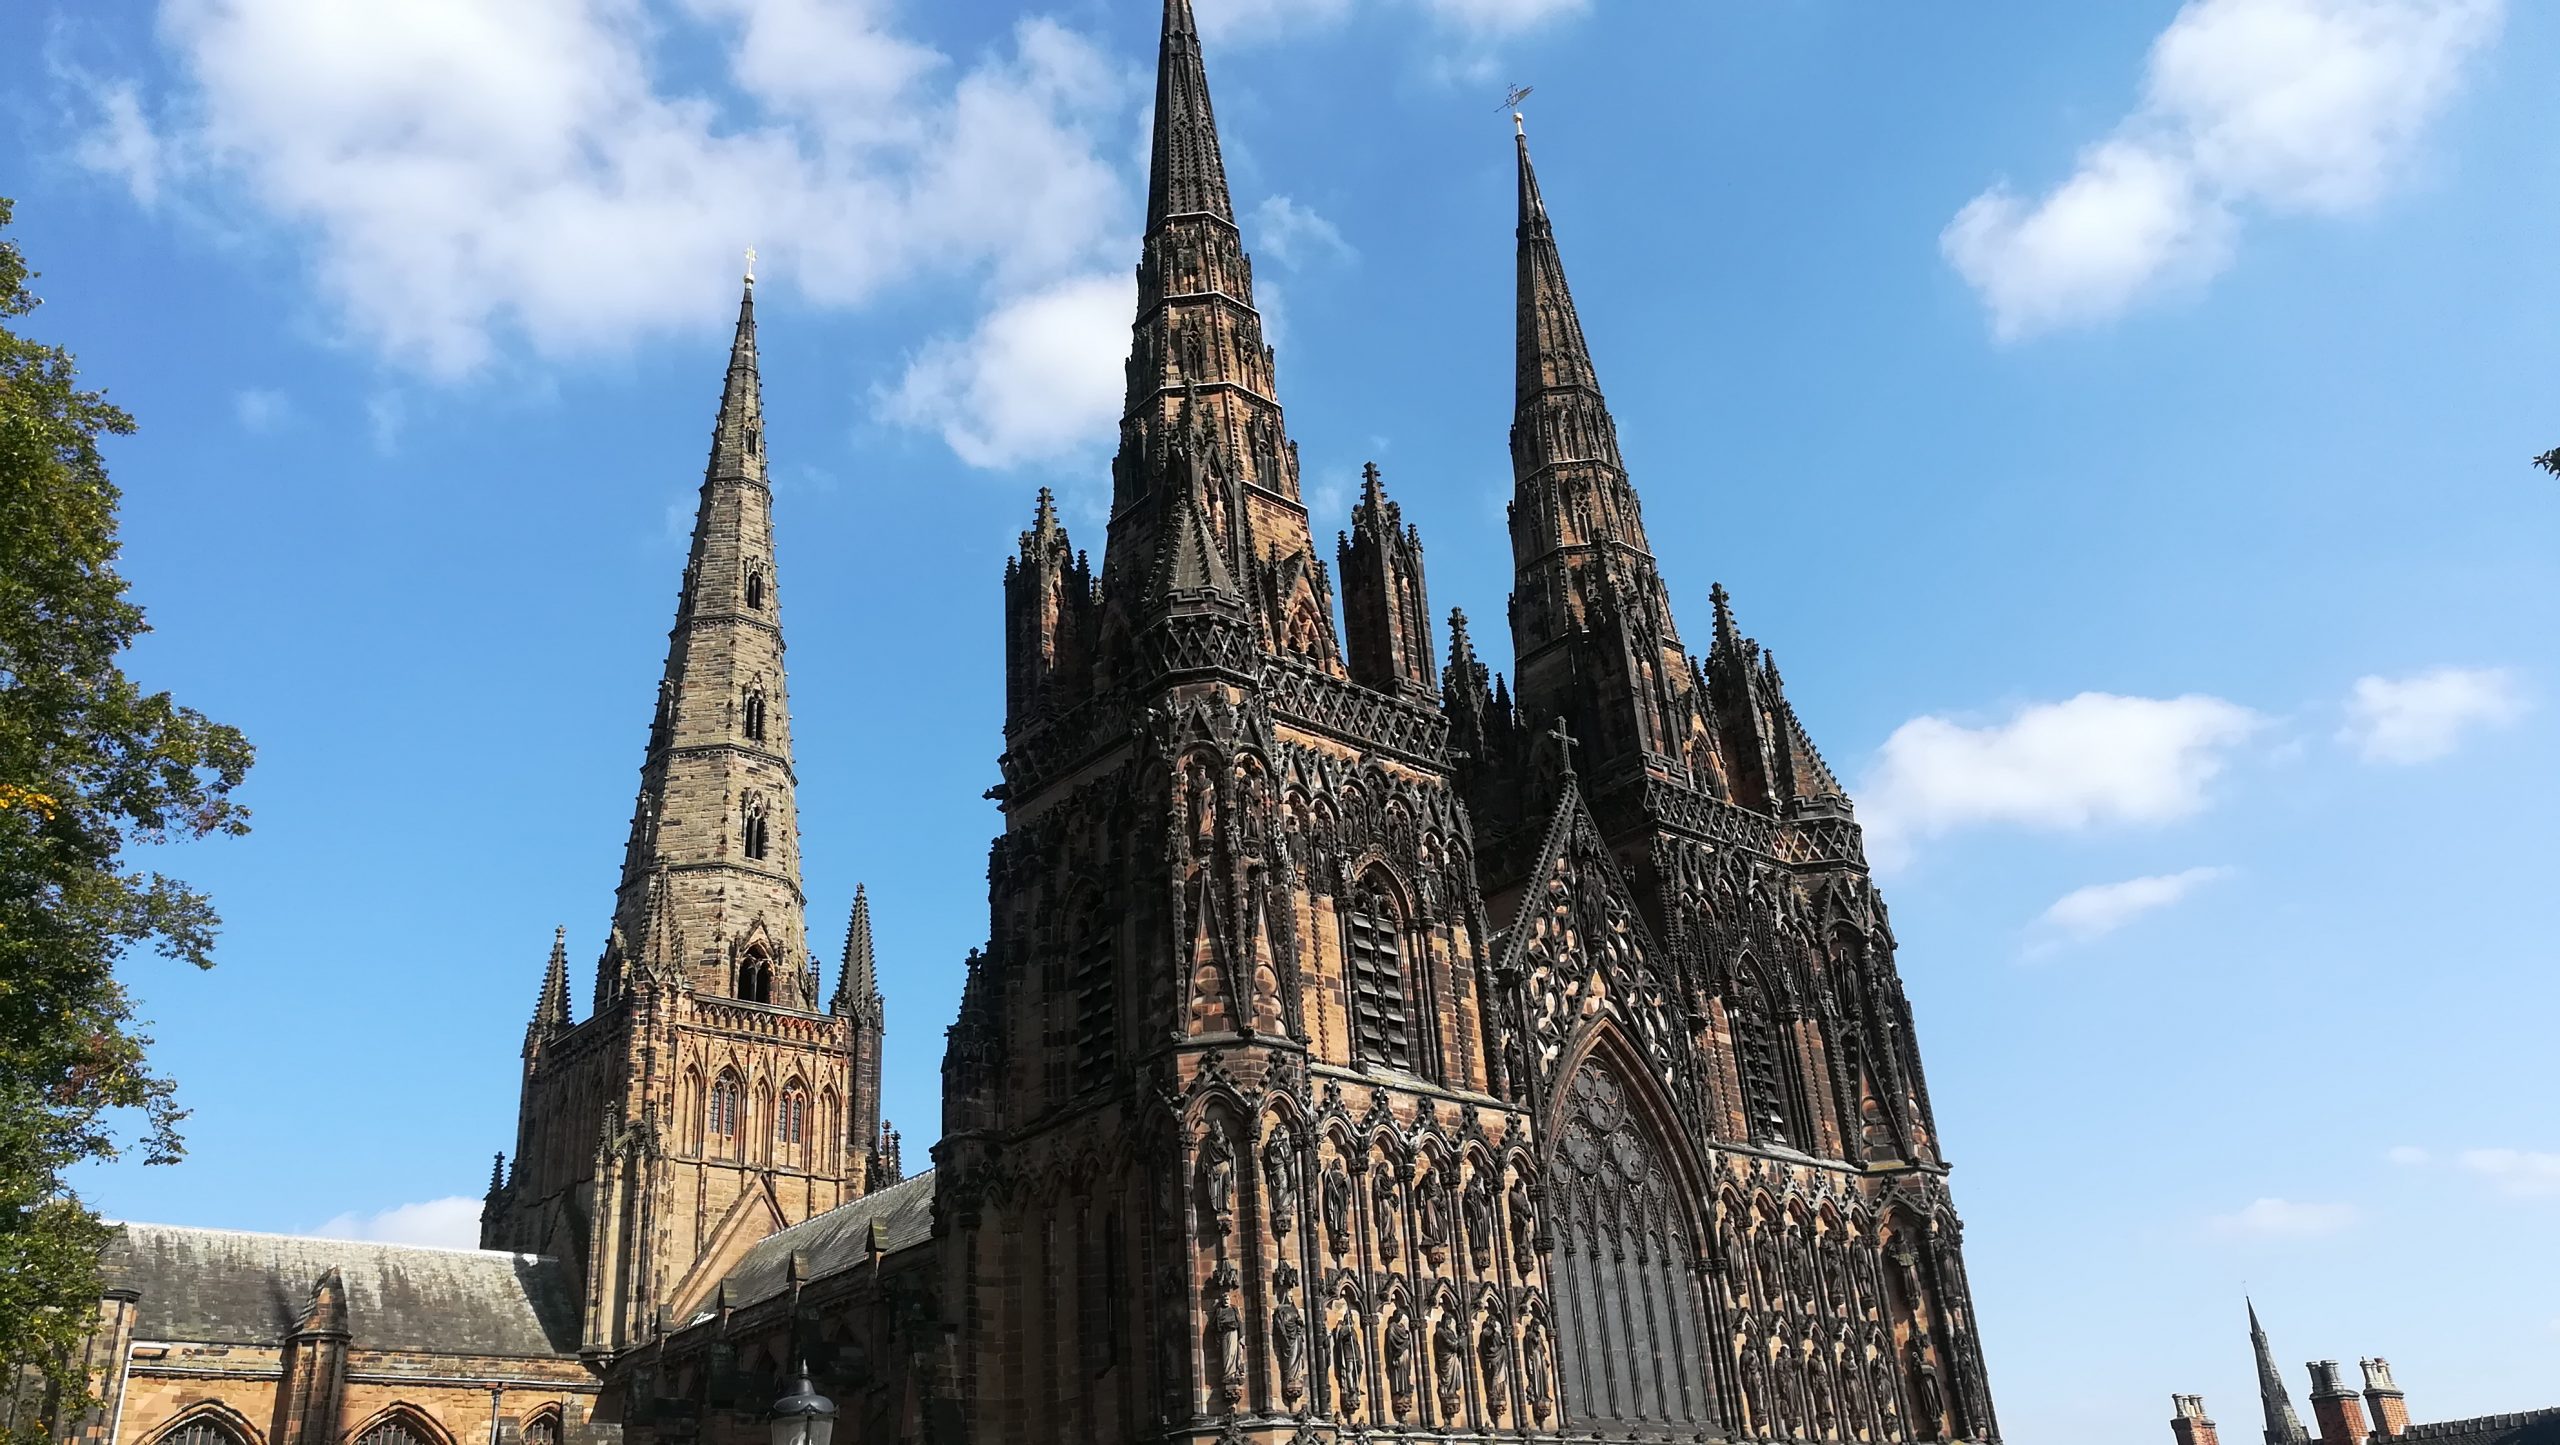 Travelling beyond the city limits – X3 to Lichfield